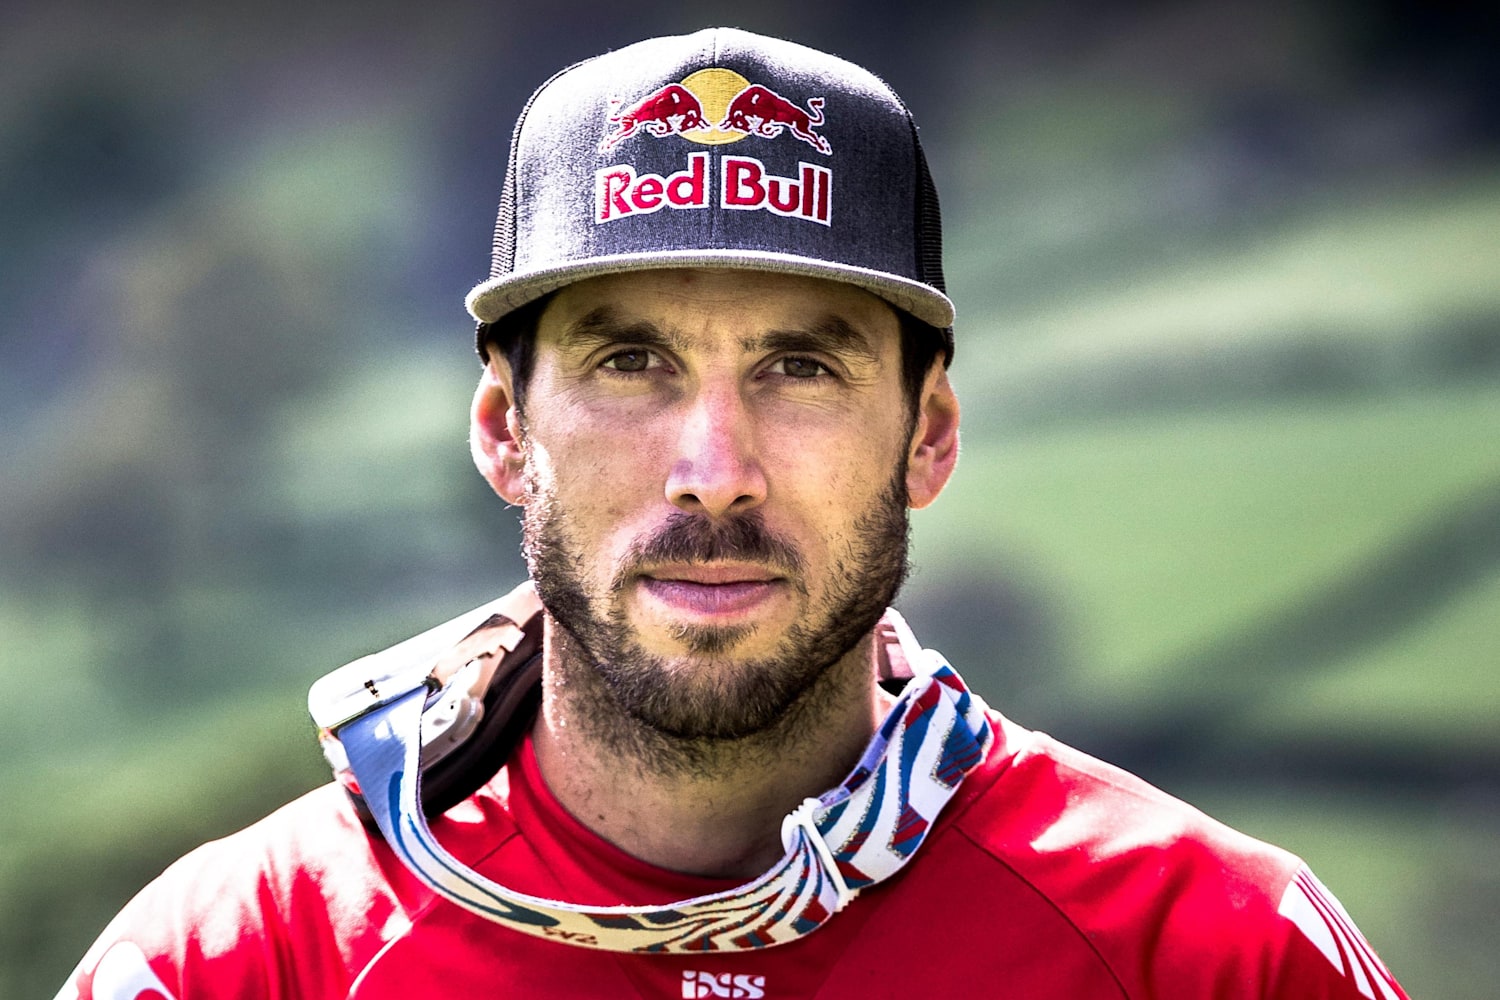 Gee Atherton - MTB Downhill - Official Athlete Page